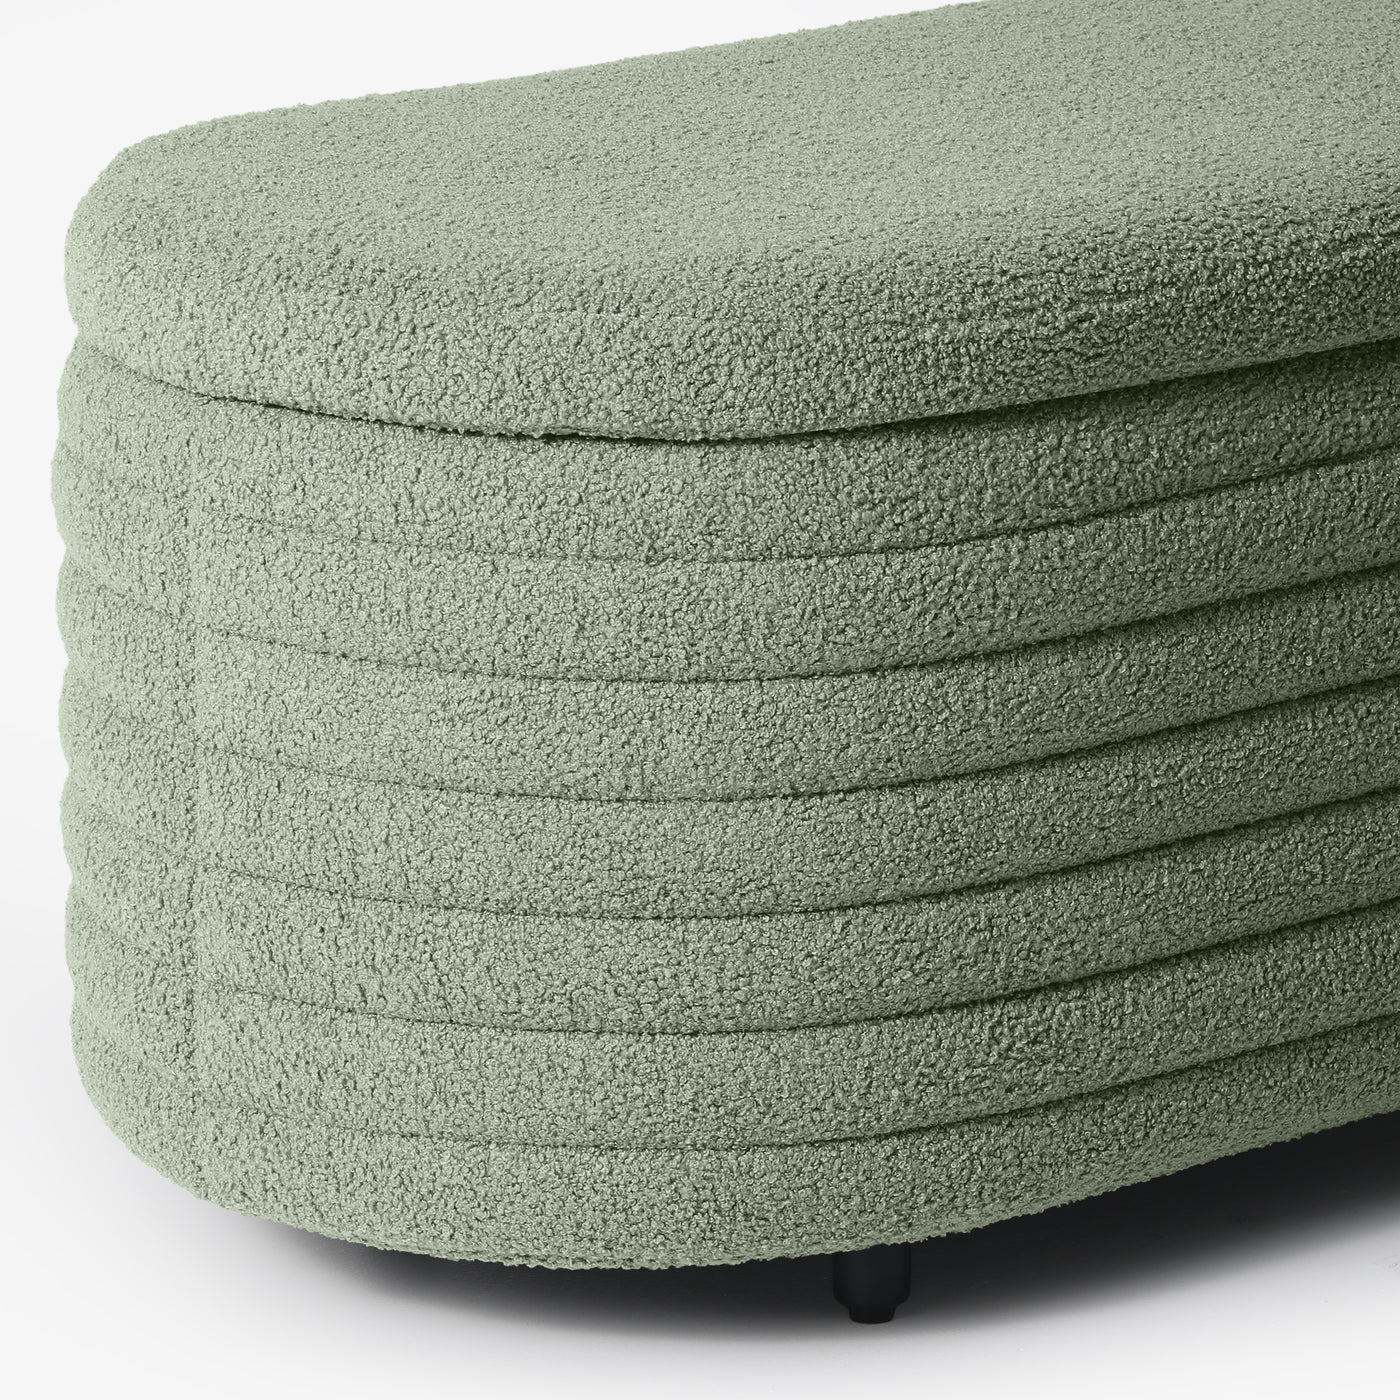 Alexandria 54" Wide Mid-Century Modern Upholstered Teddy Sherpa Tufted Oval Storage Ottoman Bench